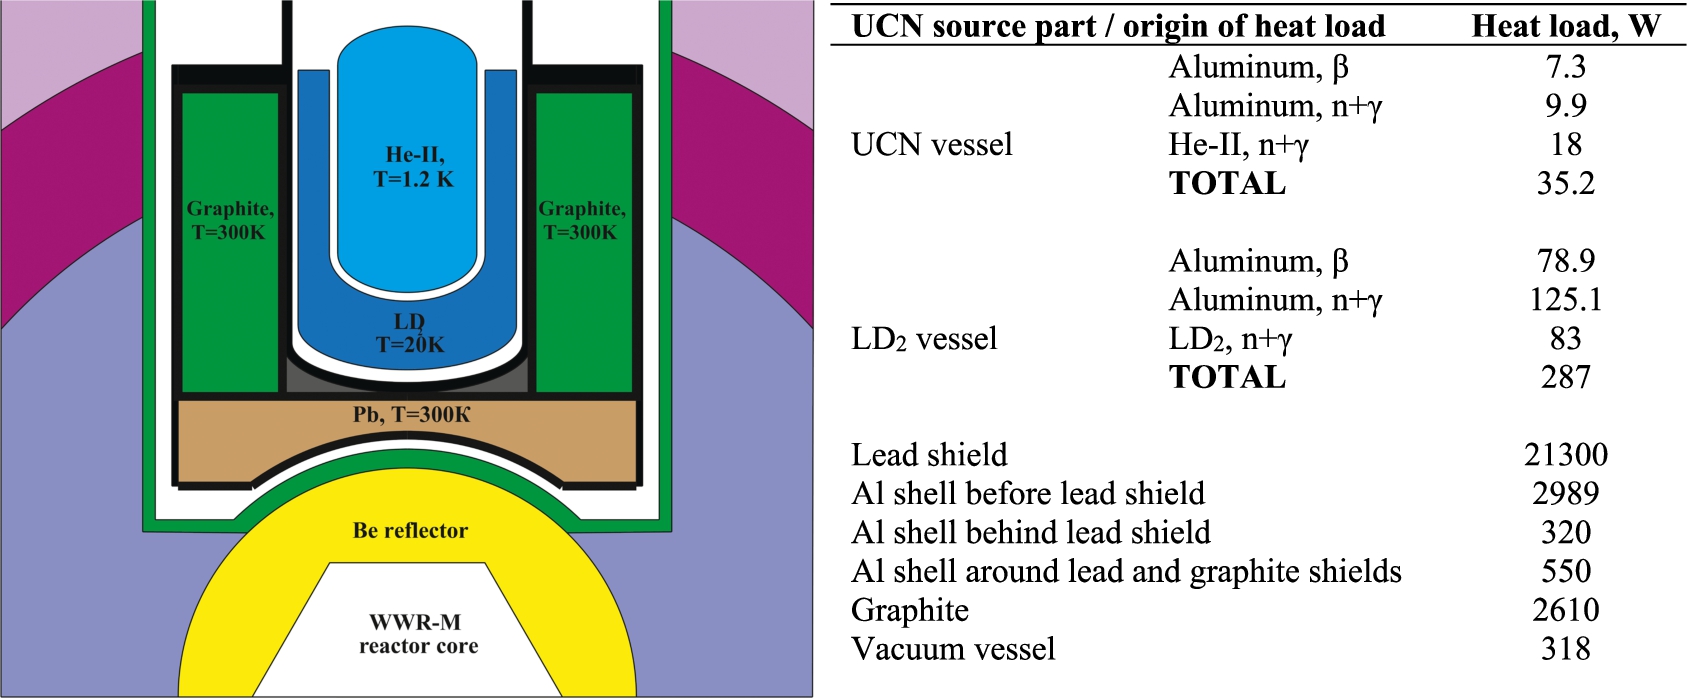 Proposed implementation of a He-II UCN source in the thermal column of PNPI’s WWR-M reactor. Left: horizontal cut view. Right: heat loads on various elements of the UCN source at 16 MW reactor power.